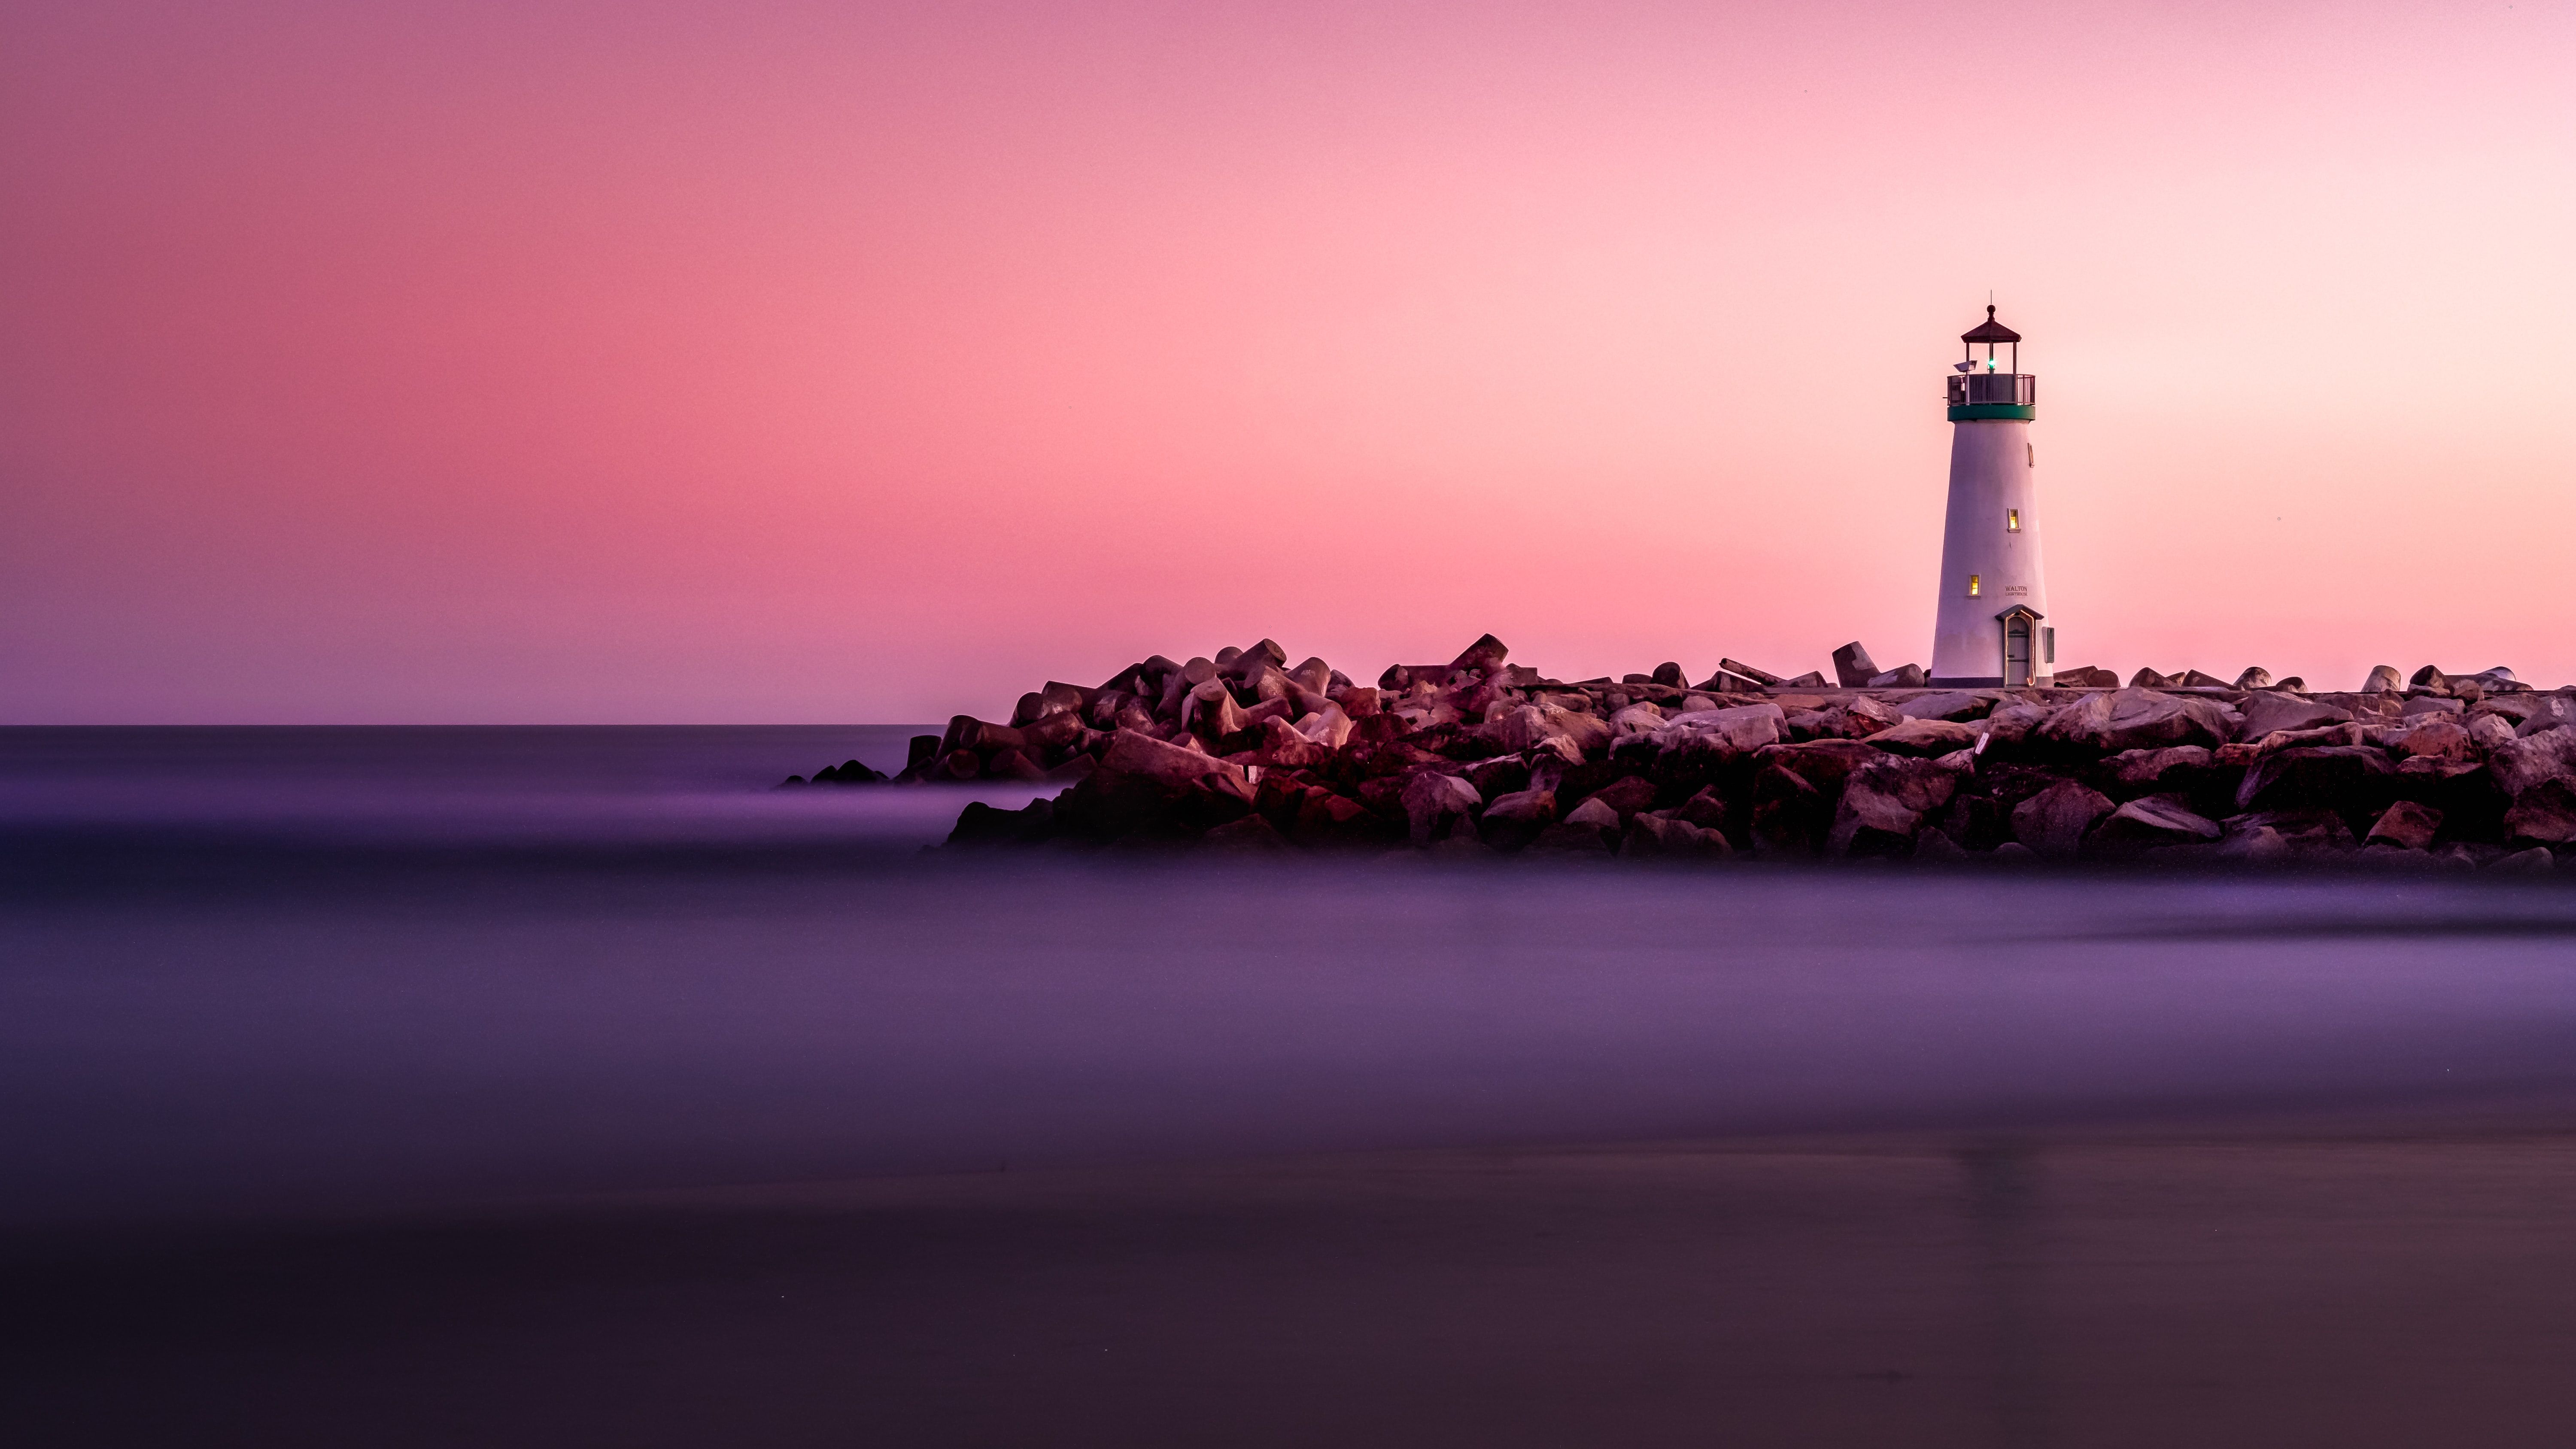 Lighthouse Picture. Download Free Image